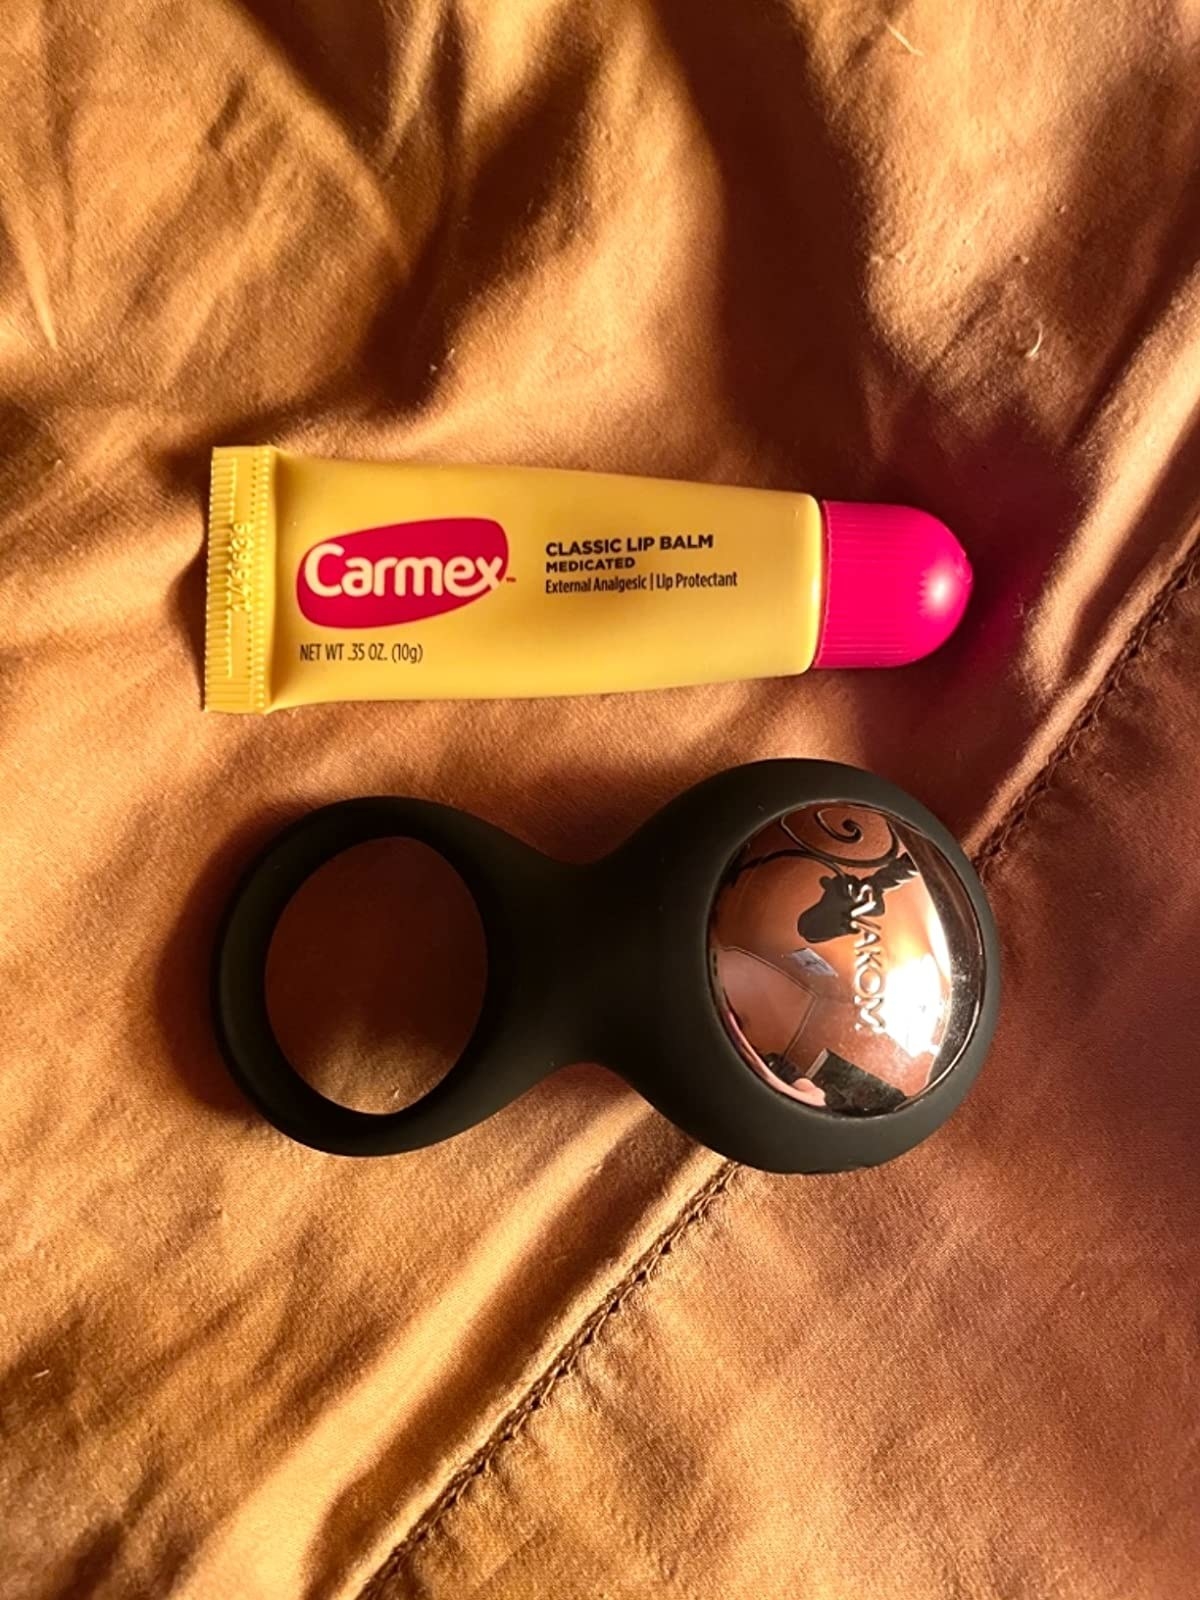 Black vibrating cock ring next to tube of lip balm for size comparison